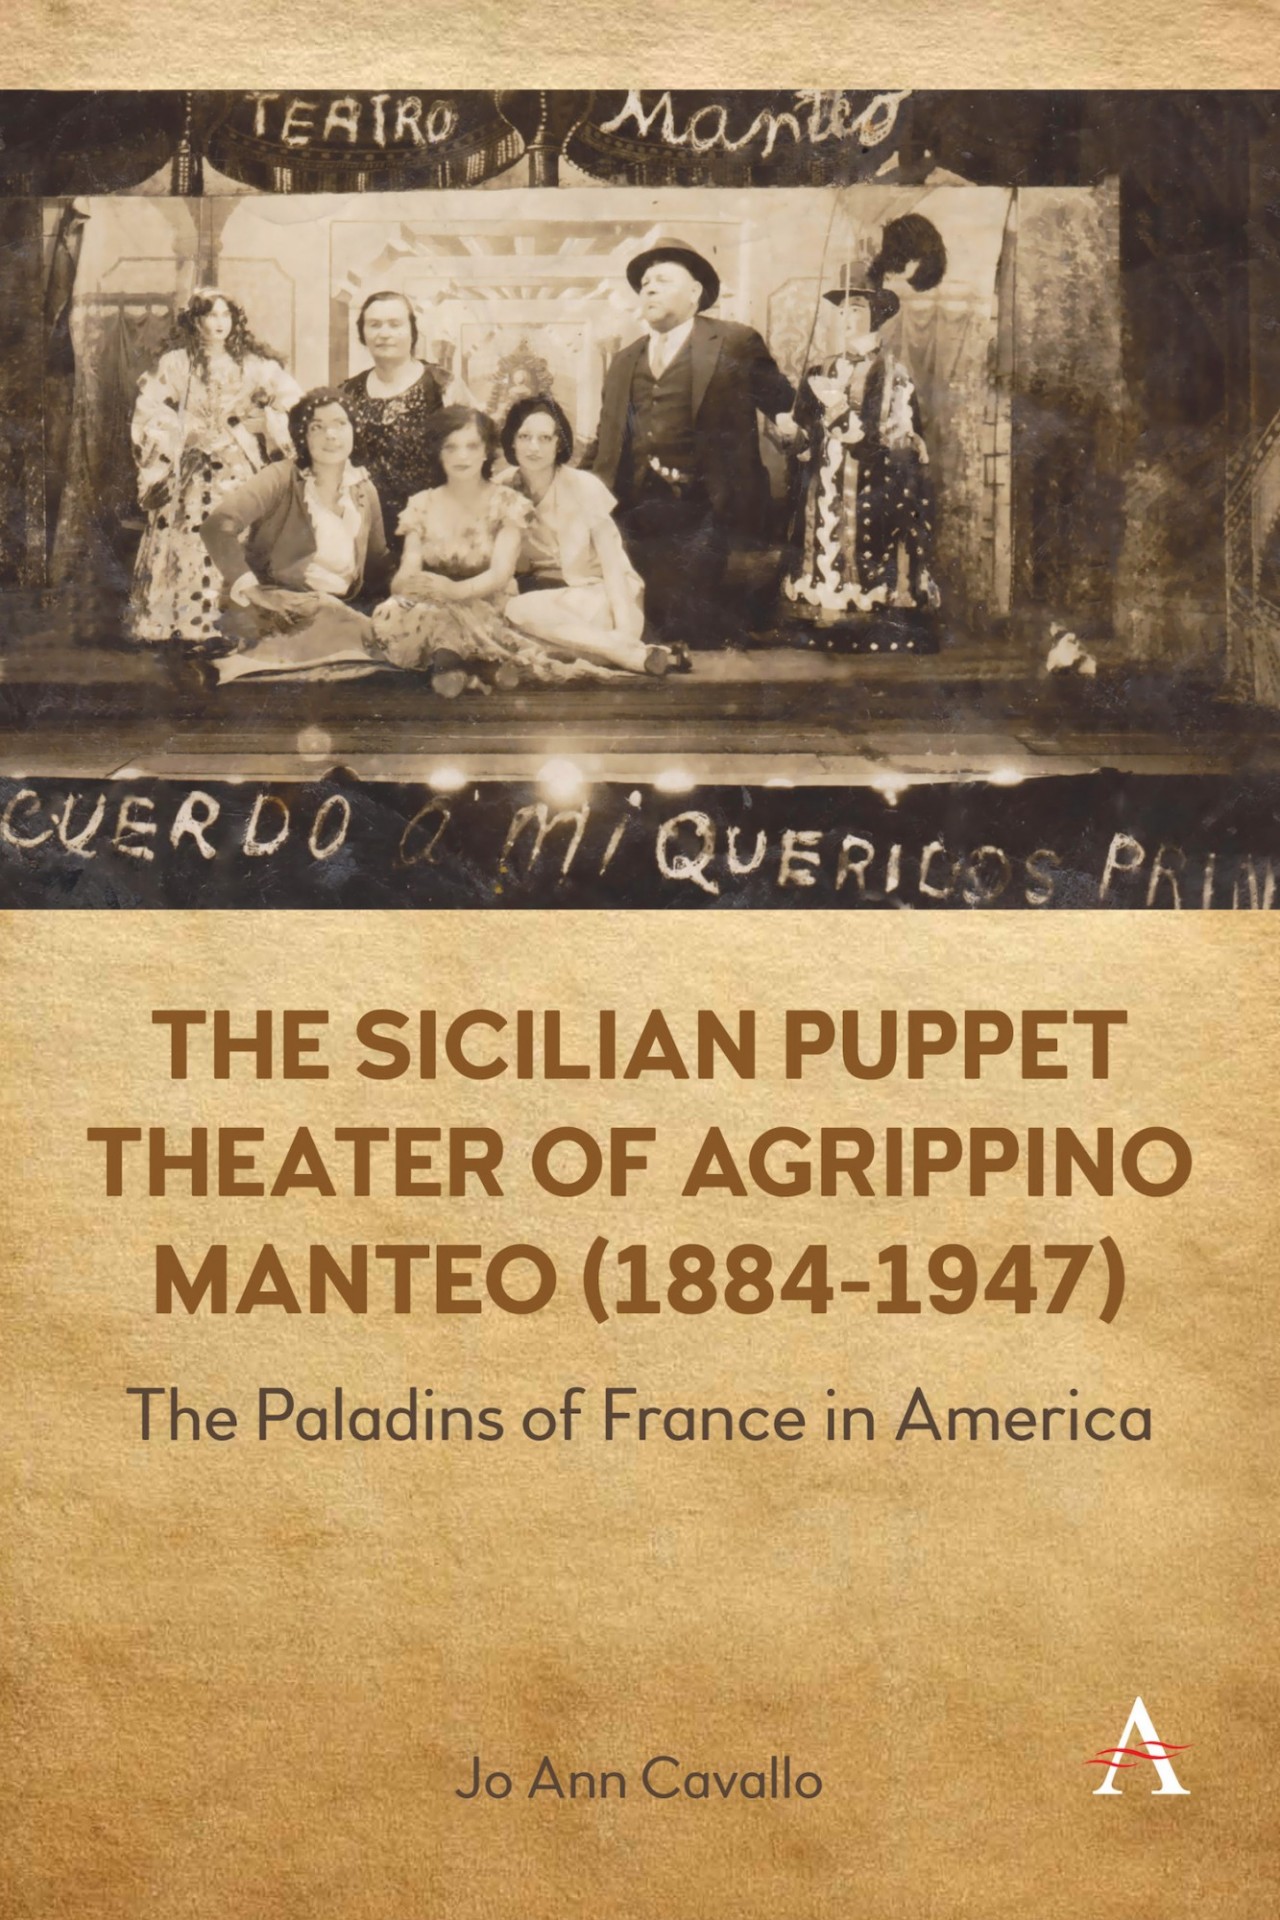 The Sicilian Puppet Theater of Agrippino Manteo (1884-1947): The Paladins of France in America